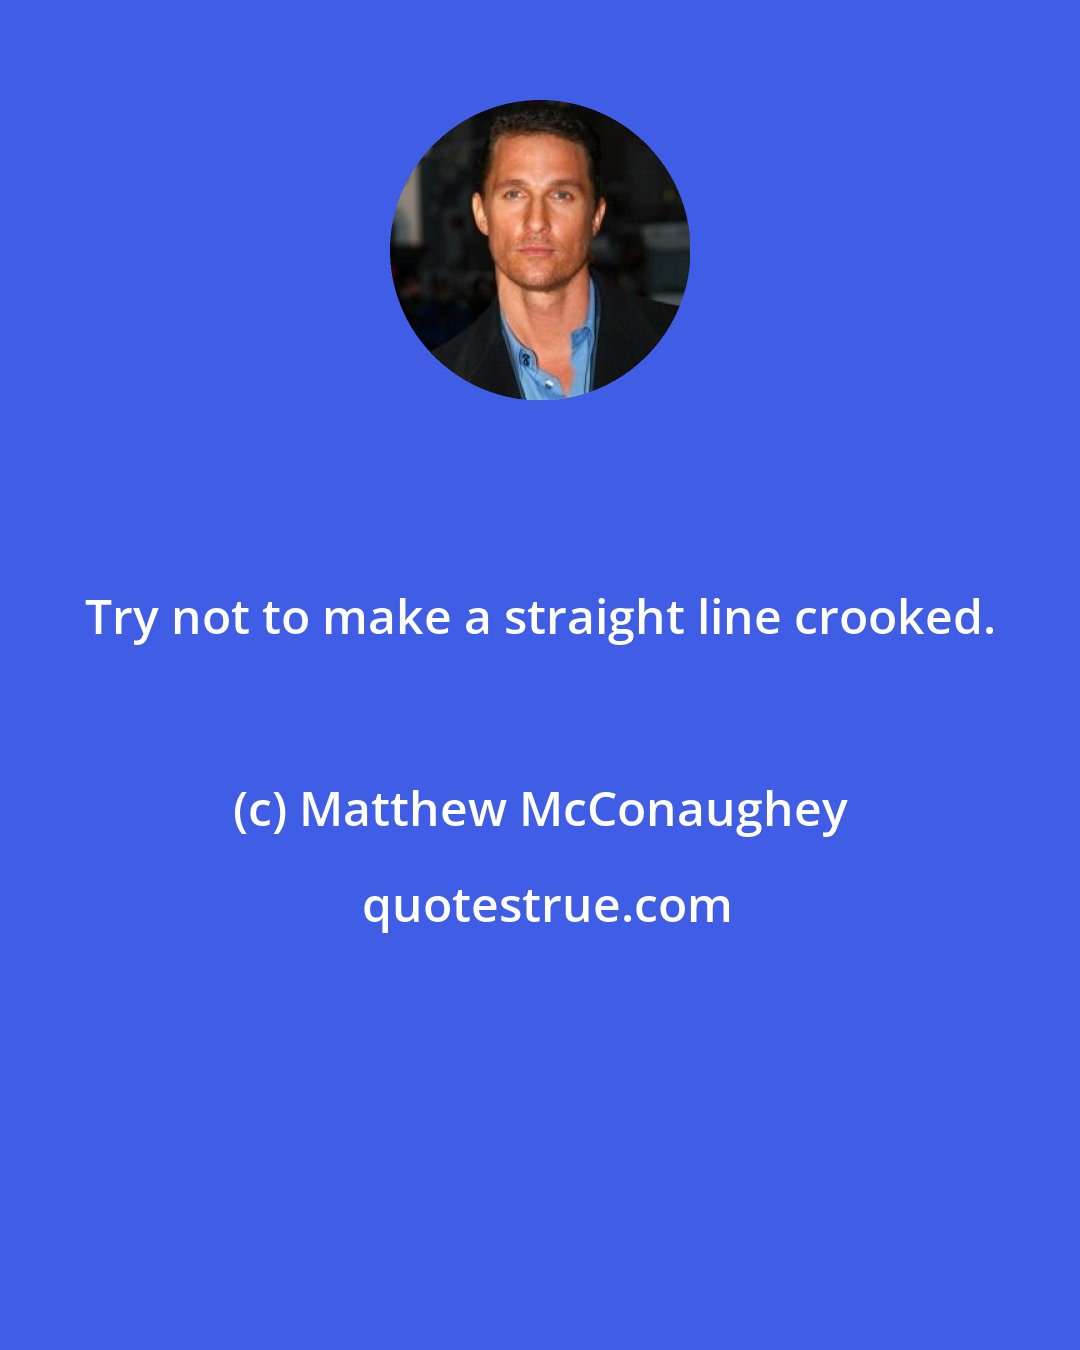 Matthew McConaughey: Try not to make a straight line crooked.